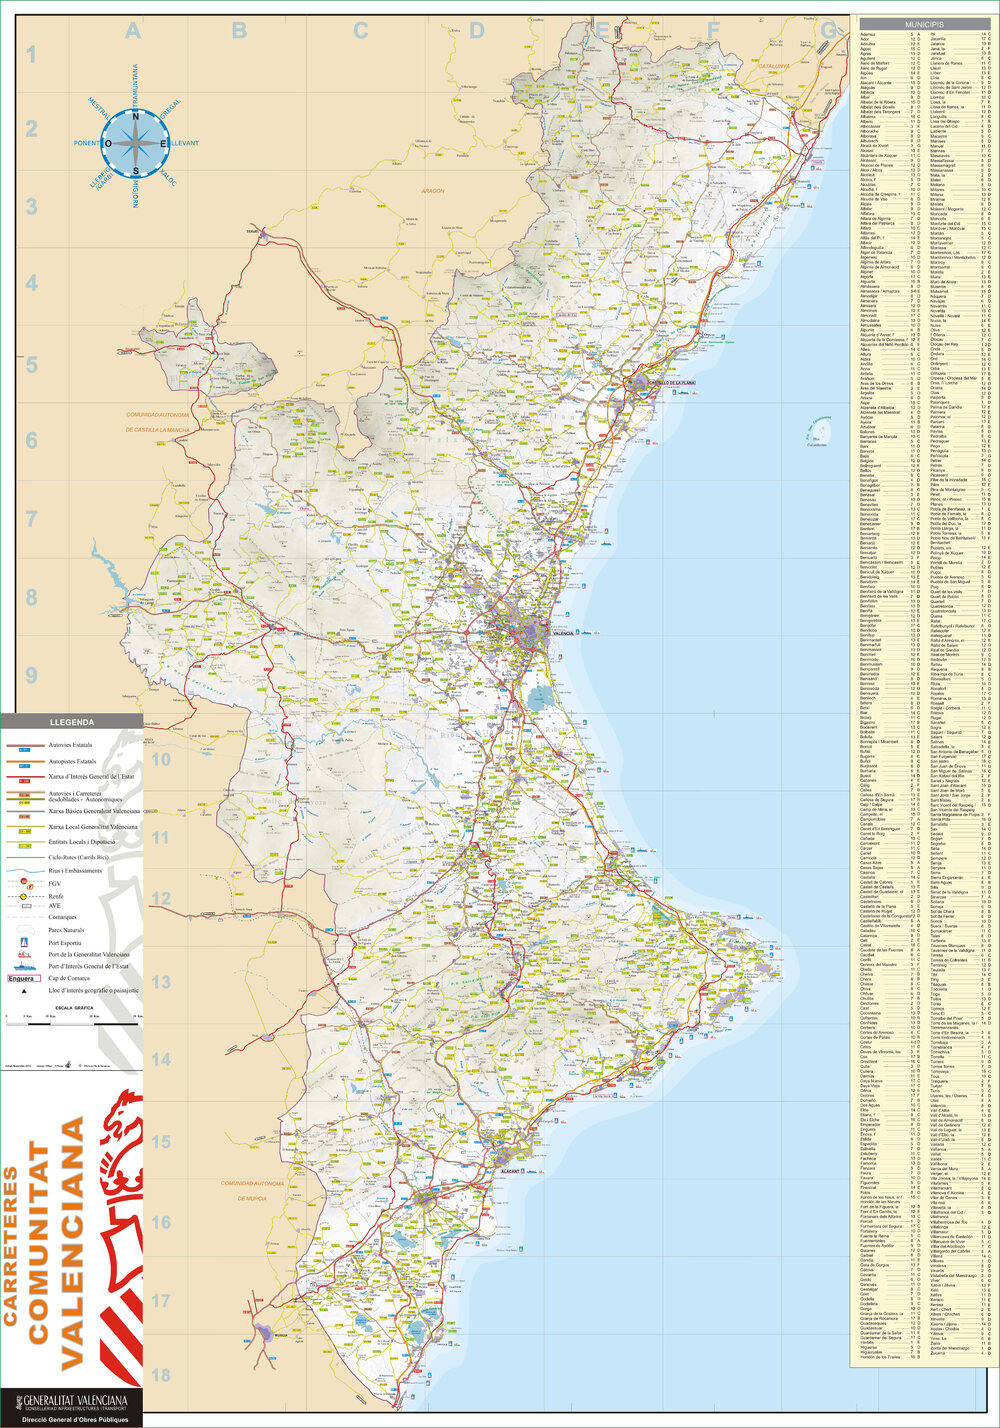 Valencian Community map 2010 - Full size | Gifex